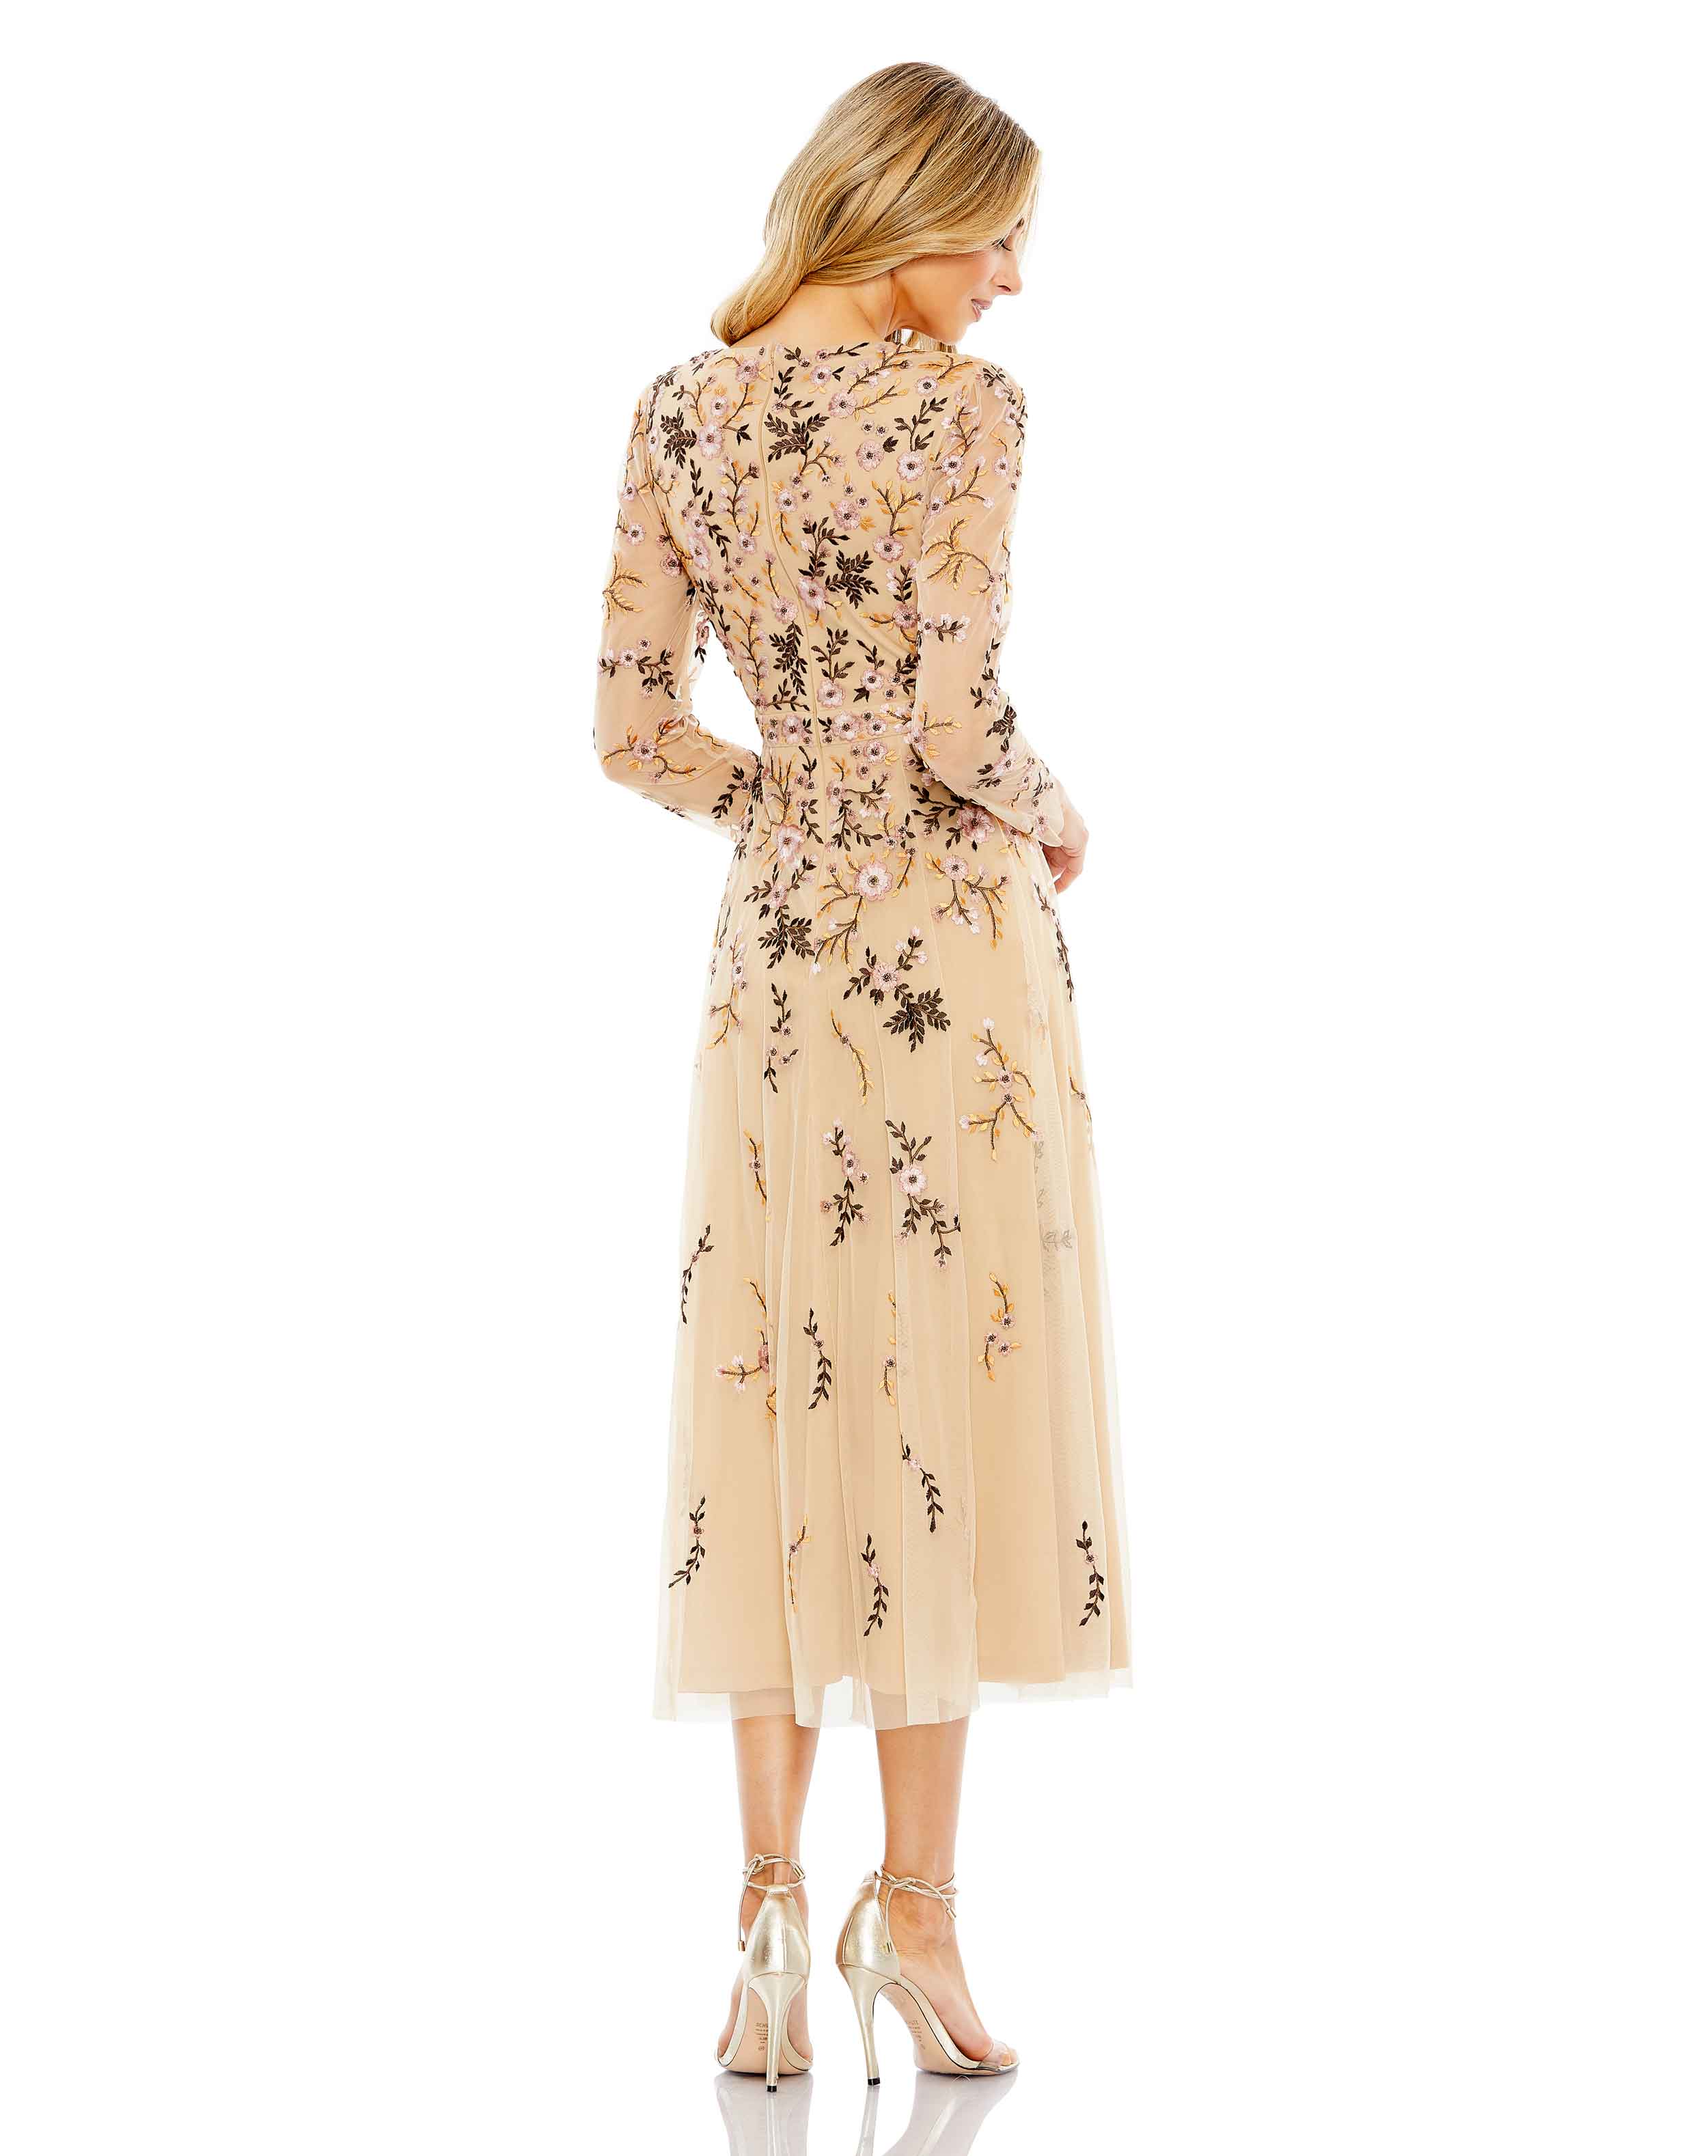 Floral Embroidered A-Line Cocktail Dress